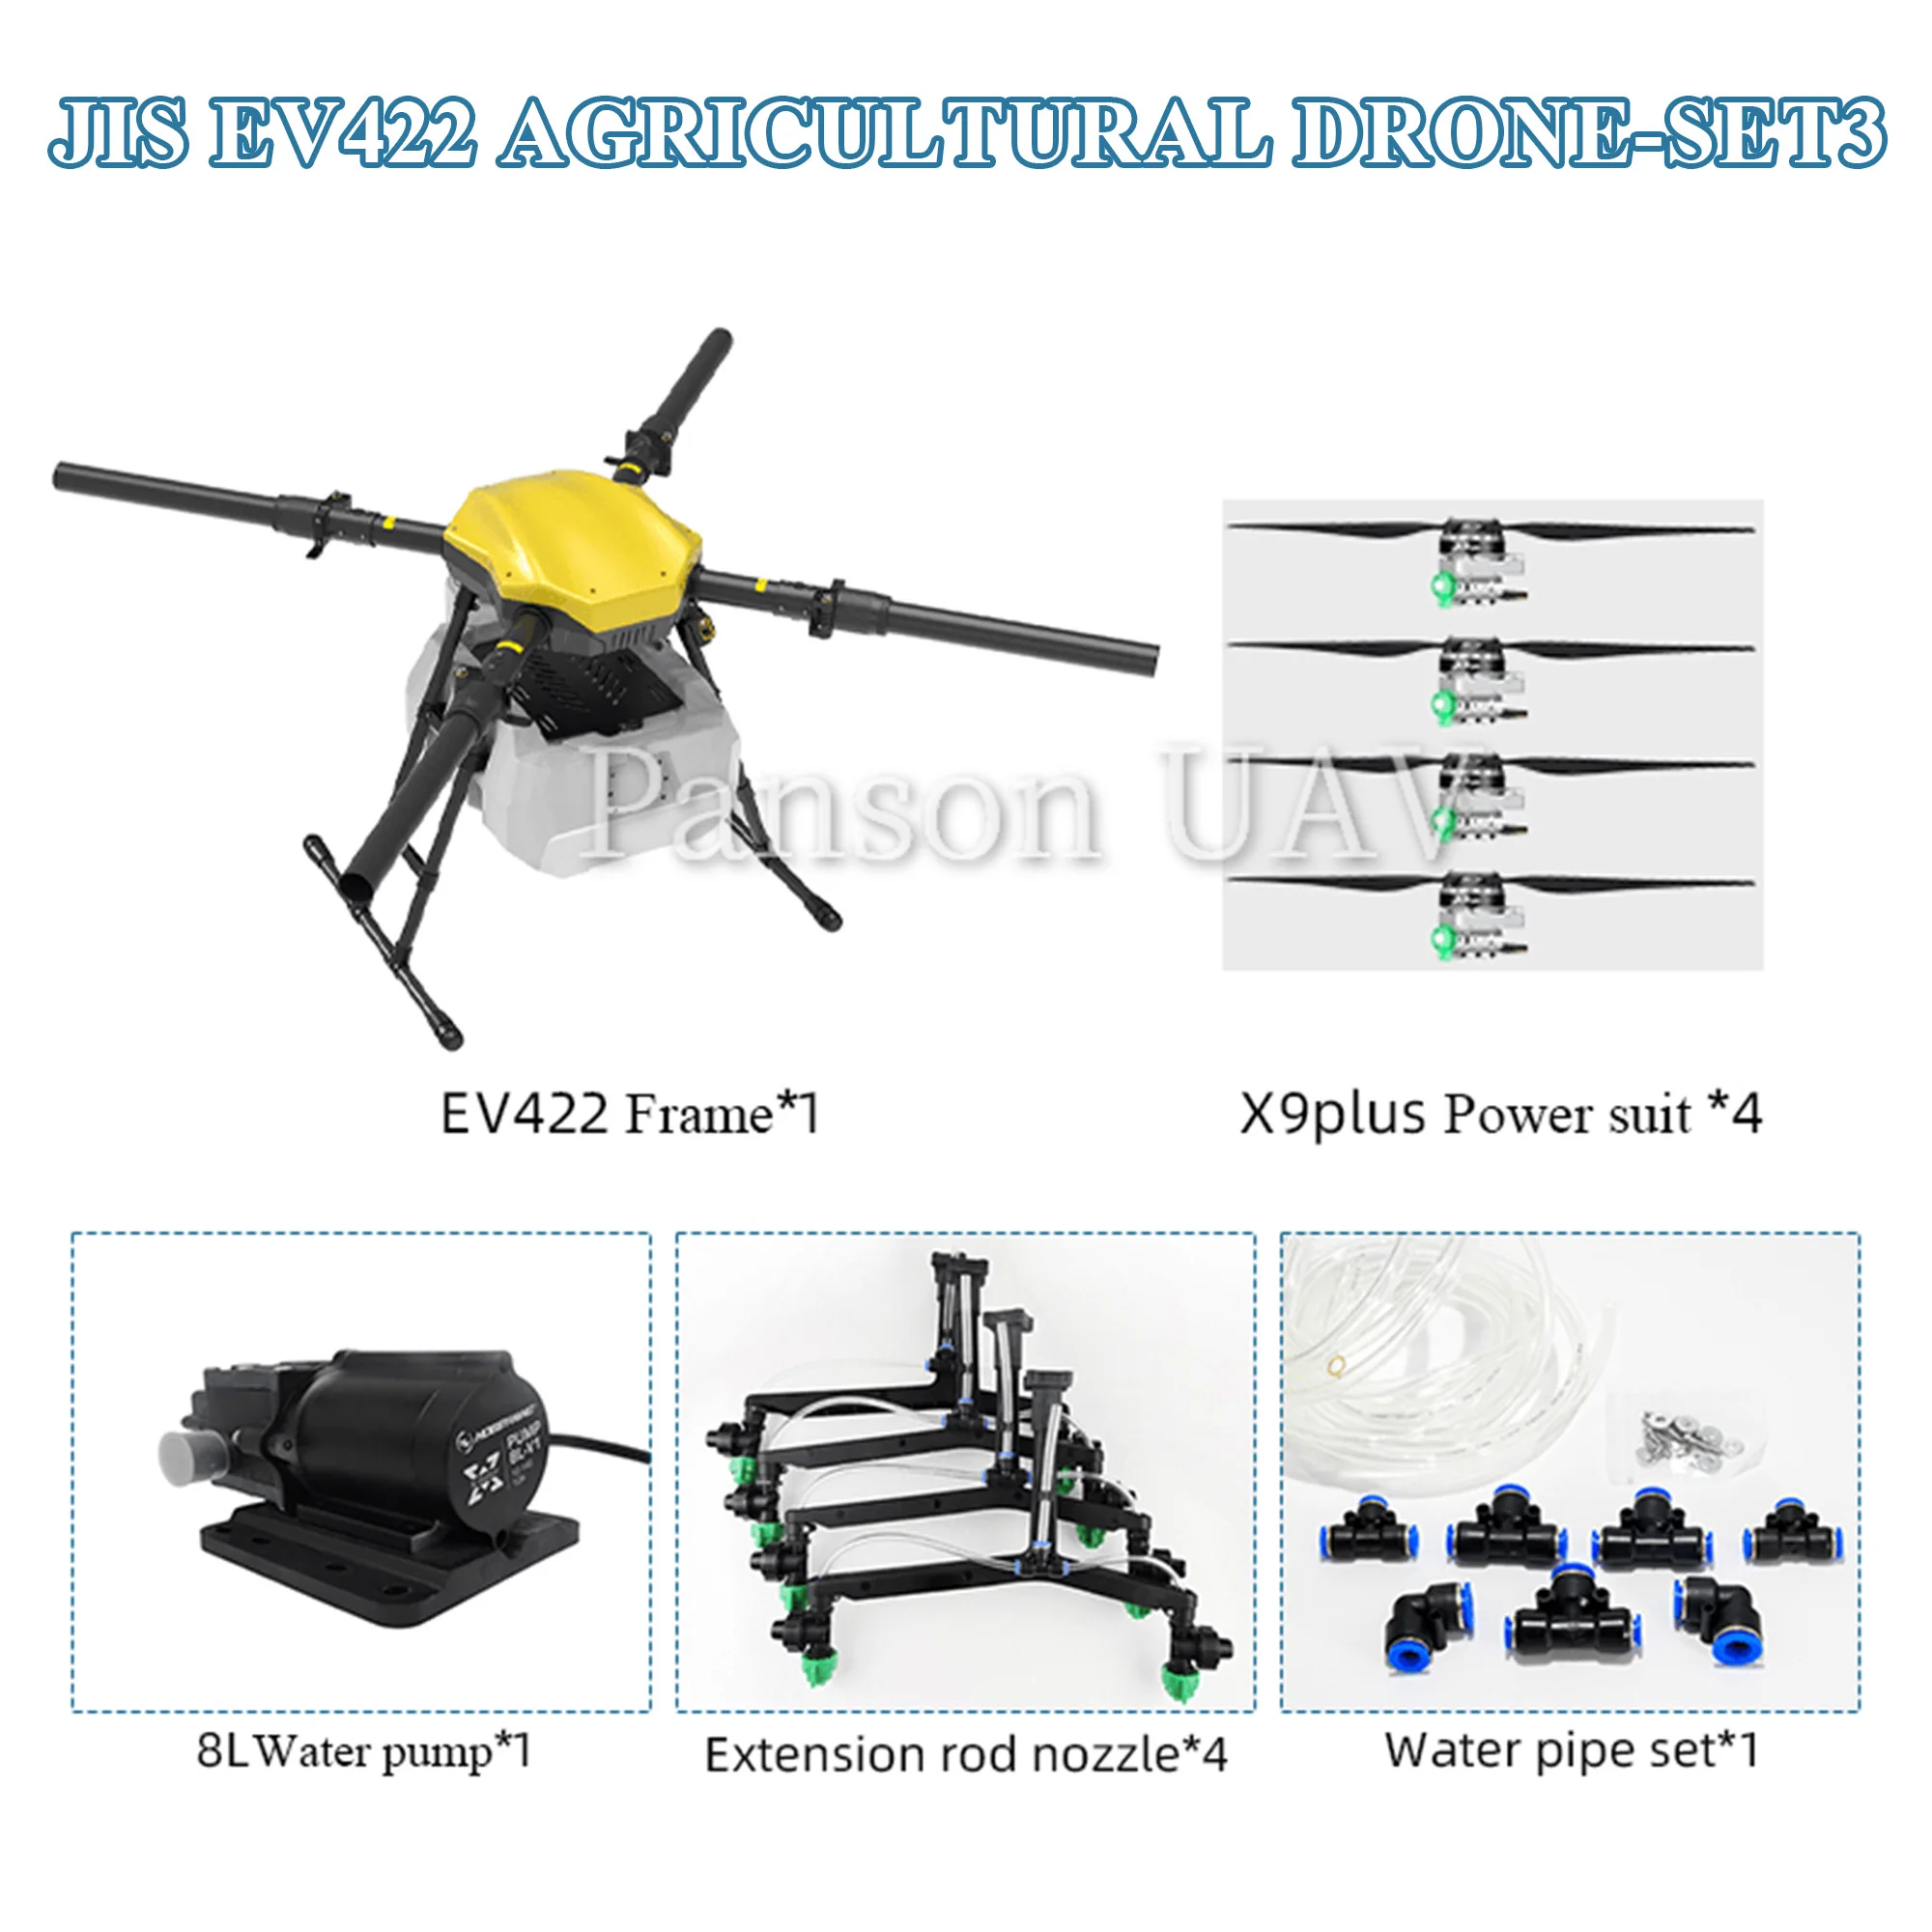 

EV422 4-Axis aircraft 22L/22KG foldable propeller agriculture drone sprayer hobbywing motor X9plus 8L water pump misting nozzle